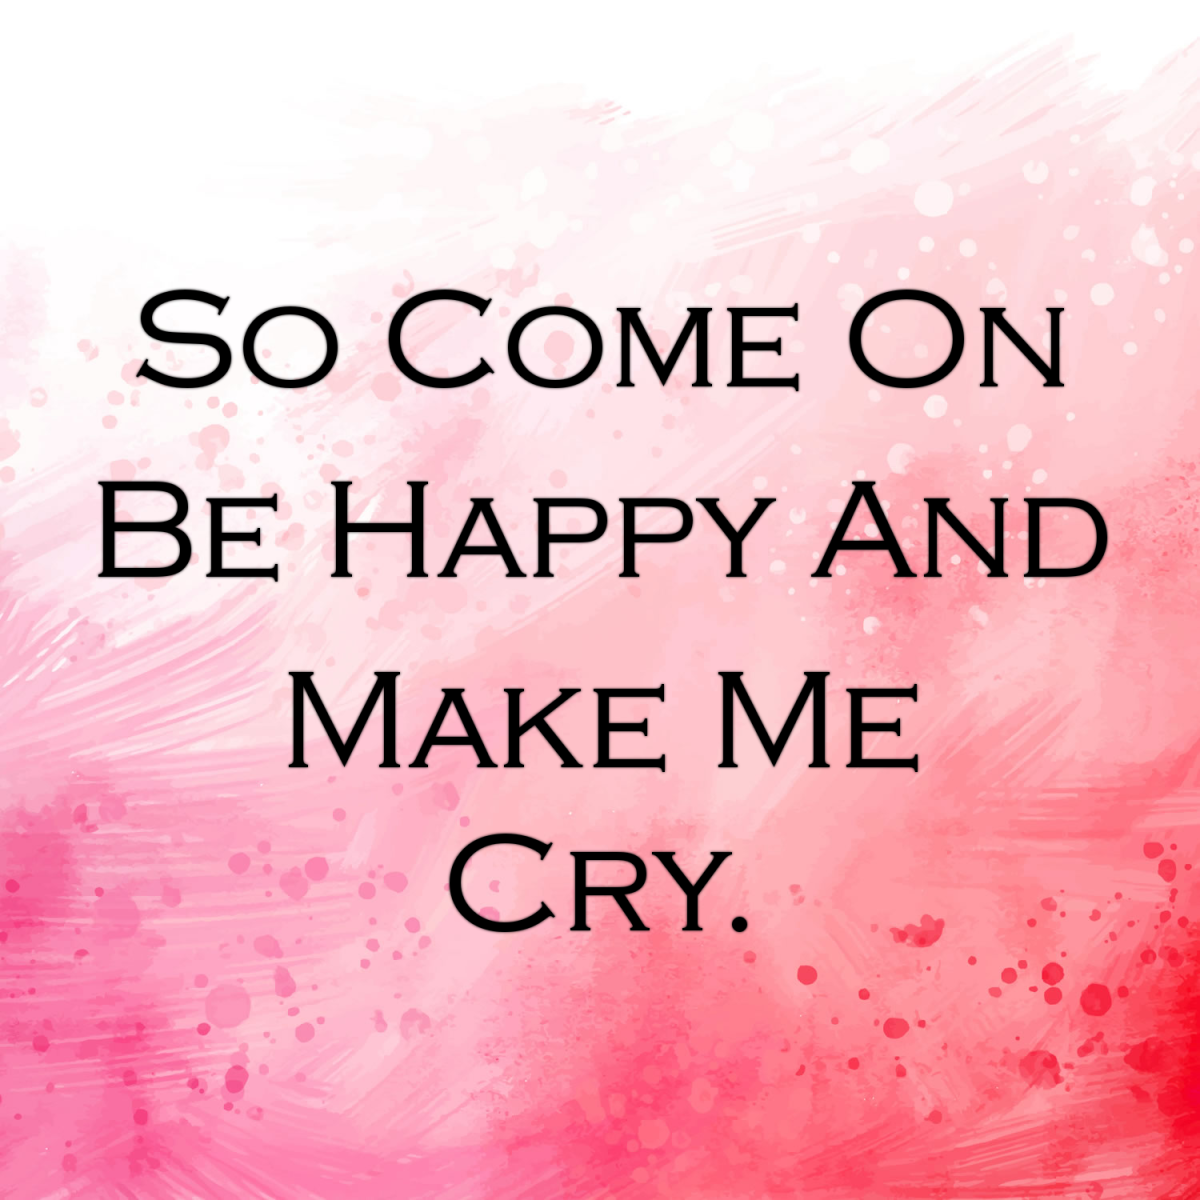 So Come on Be Happy and Make Me Cry.